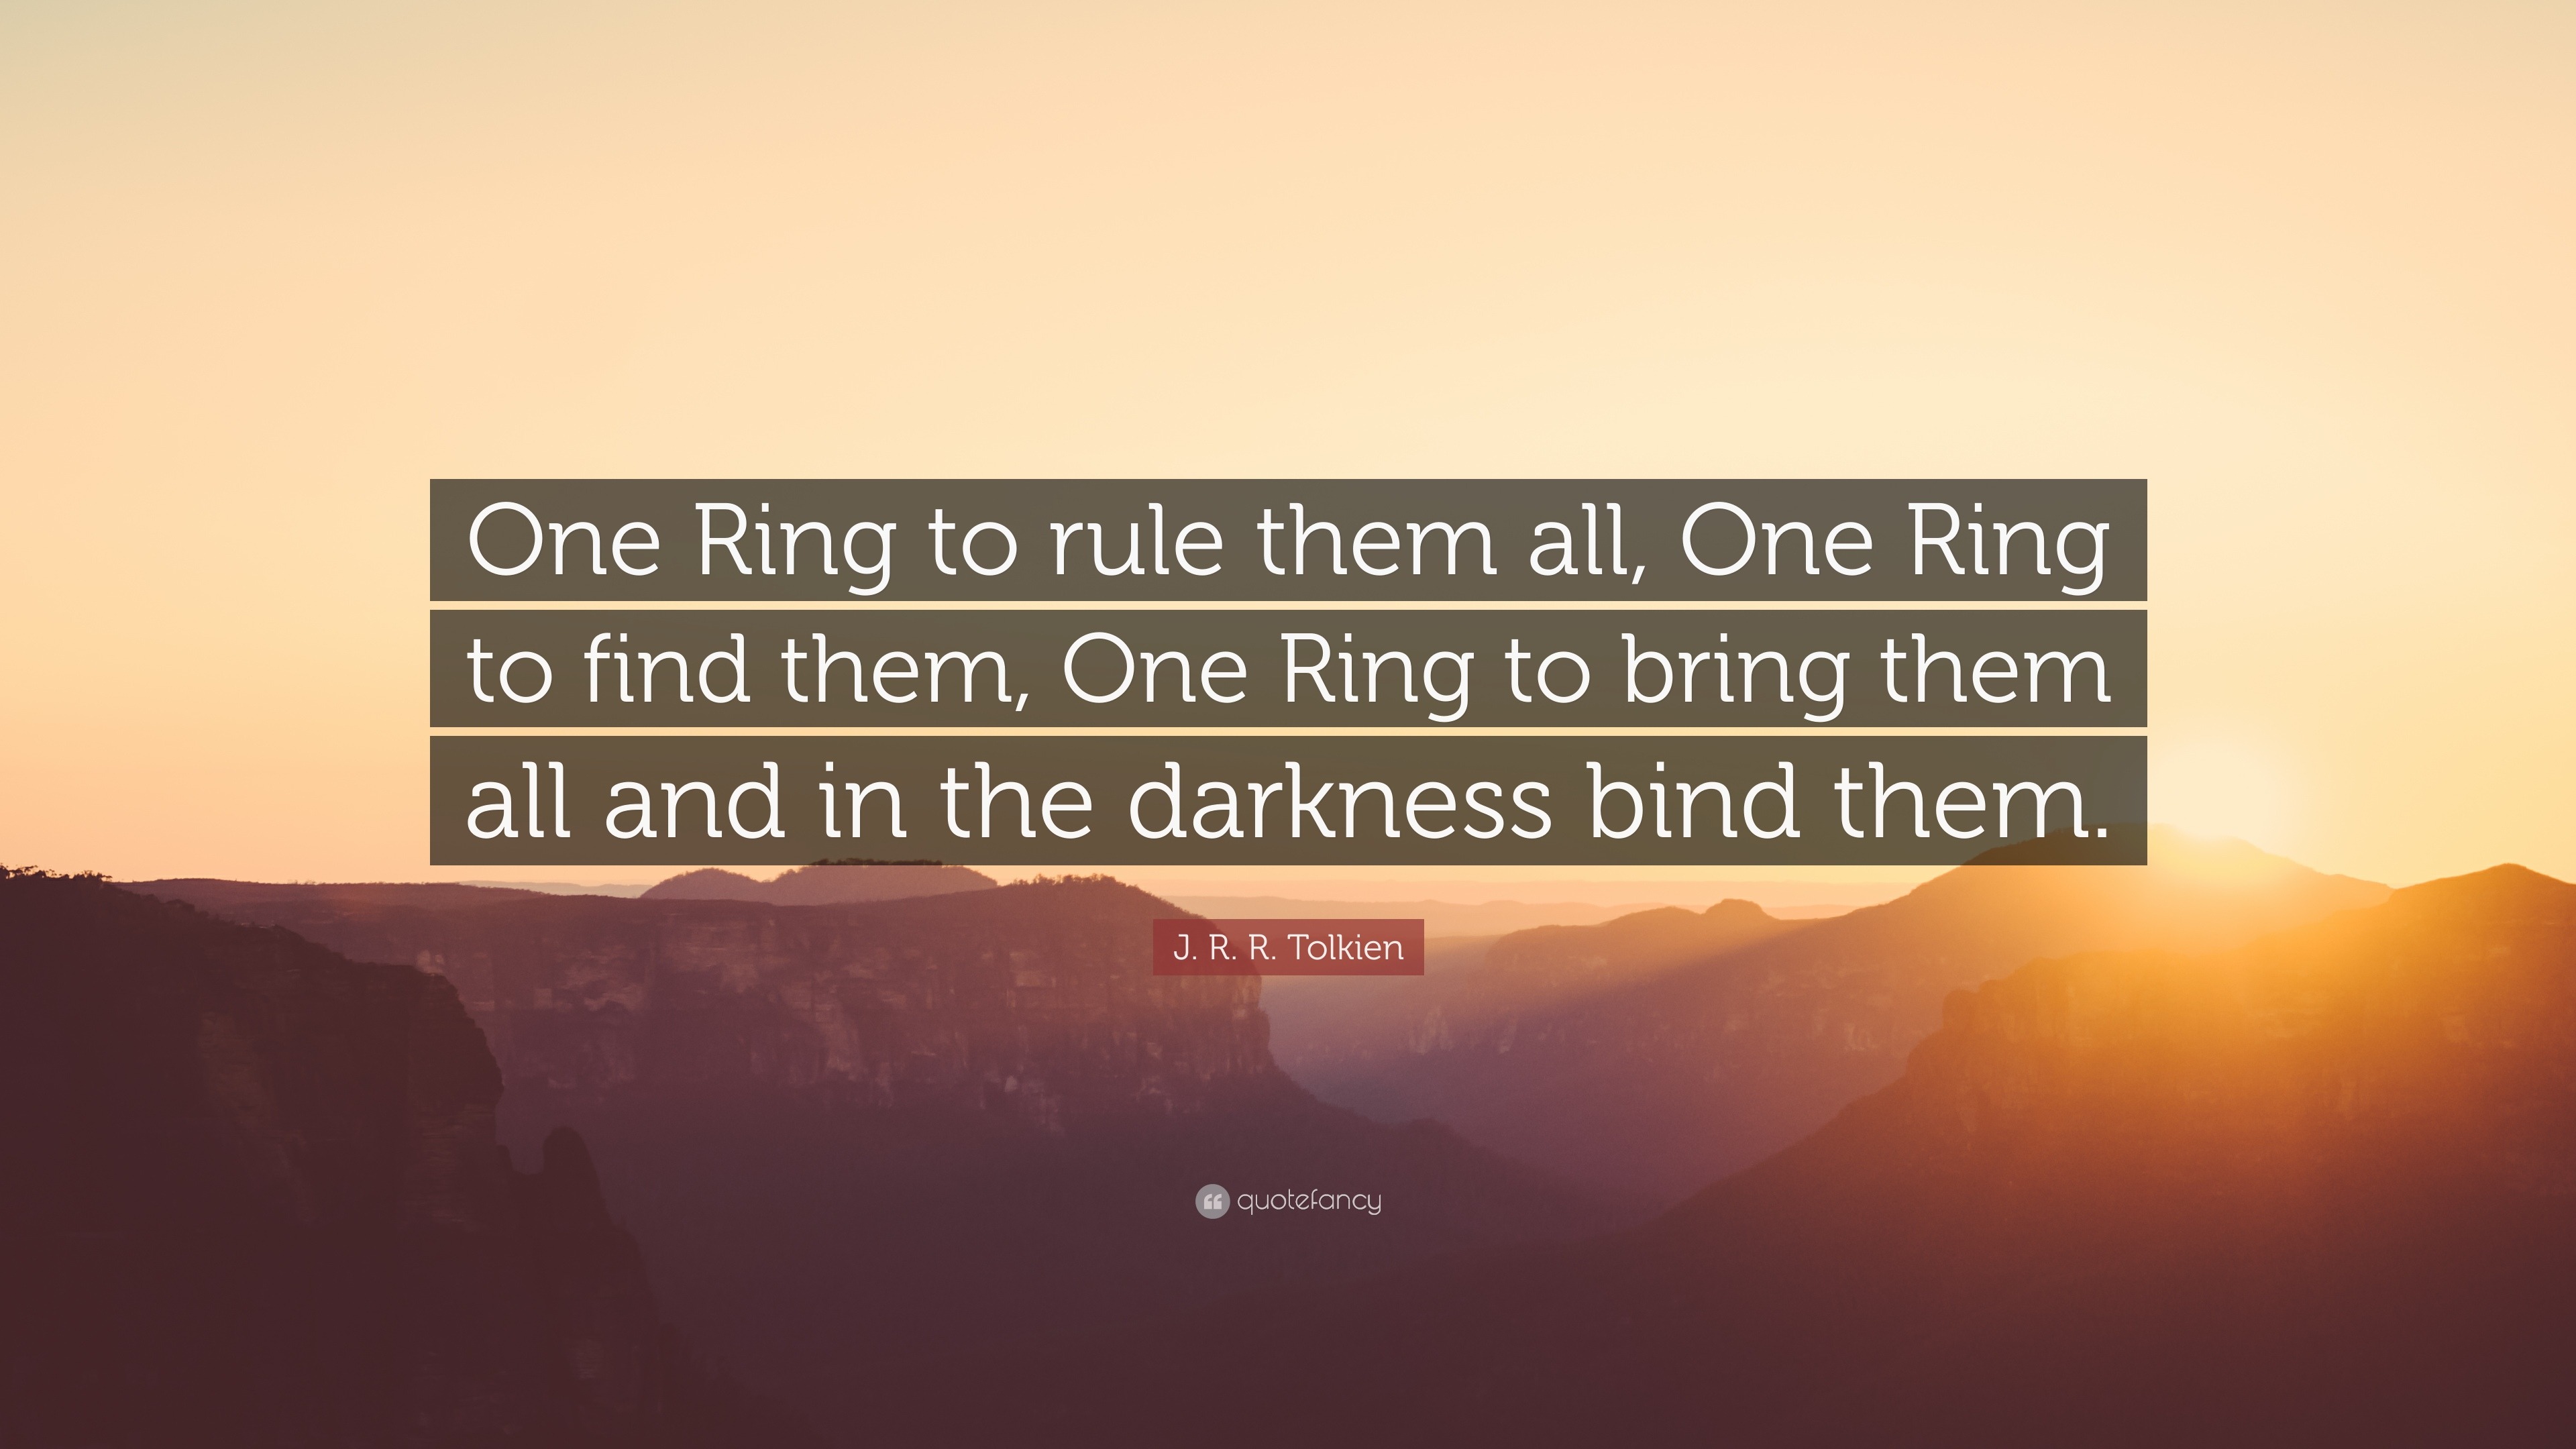 J R R Tolkien Quotes 100 Wallpapers Quotefancy